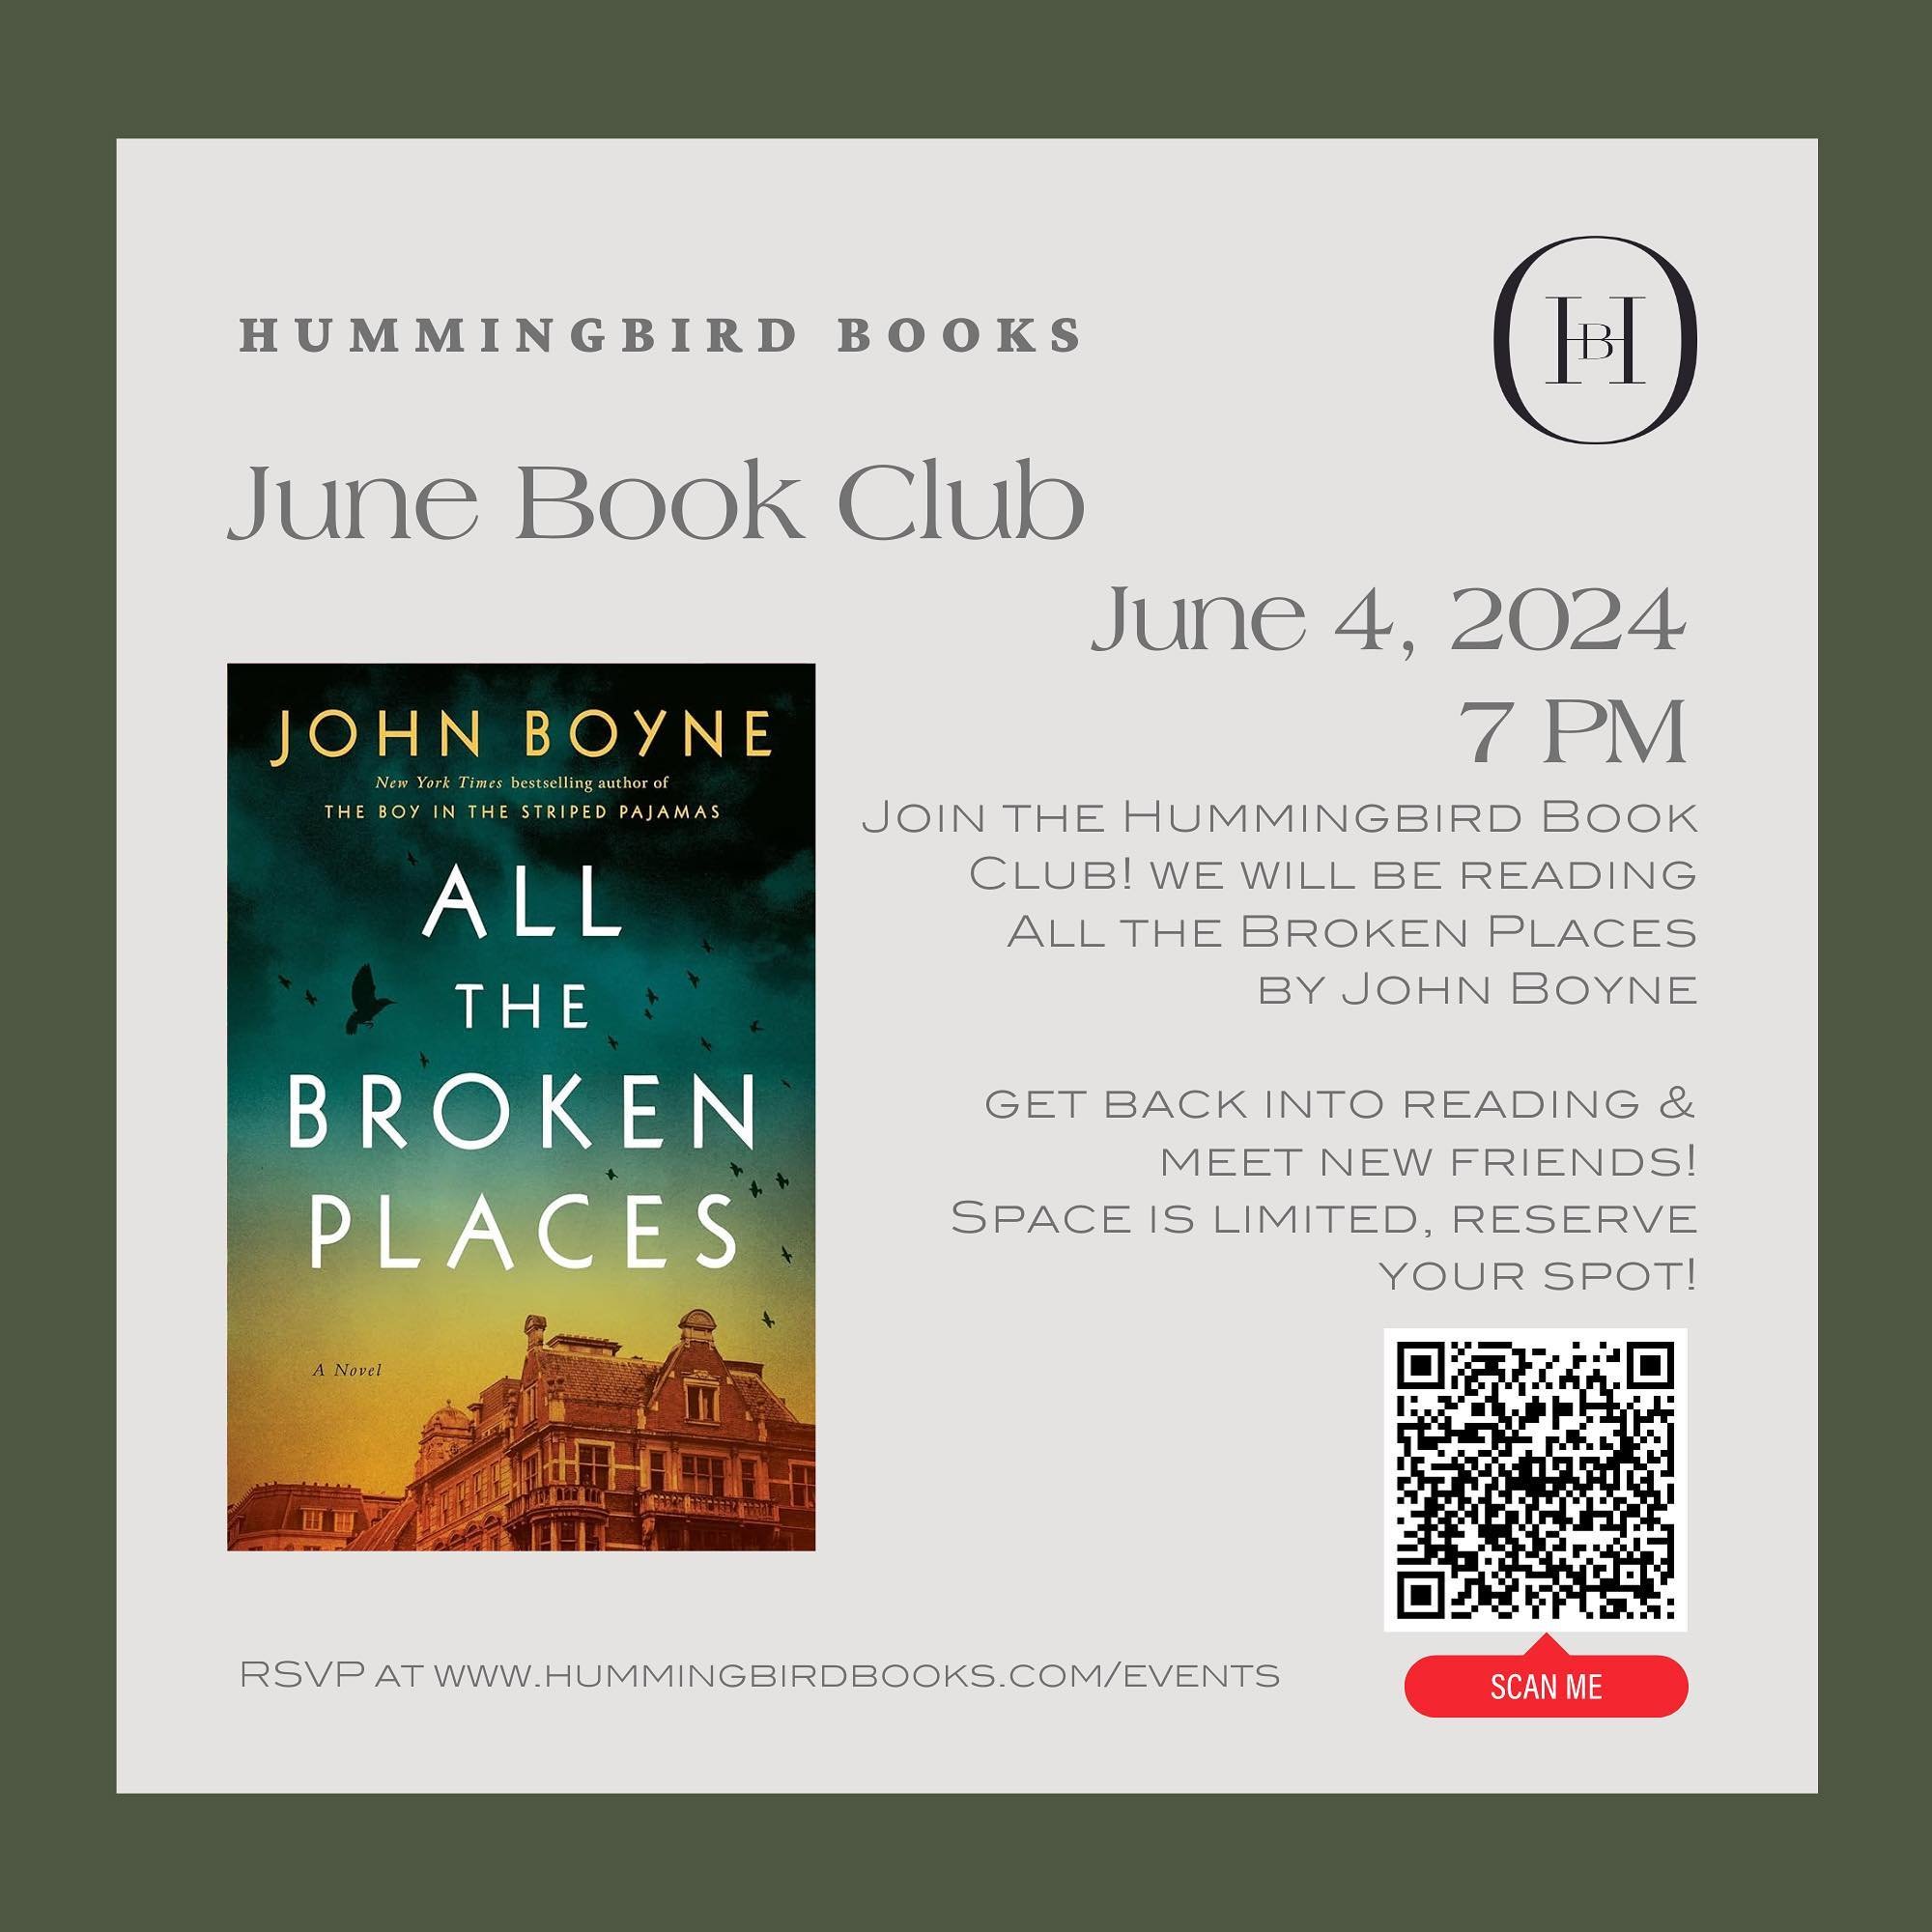 June book club! Whether you&rsquo;re a book club regular or this will be your first time, join us to read &ldquo;All The Broken Places,&rdquo; by John Boyne. 

Please RSVP by scanning the QR code in this post or by visiting the events page on our web